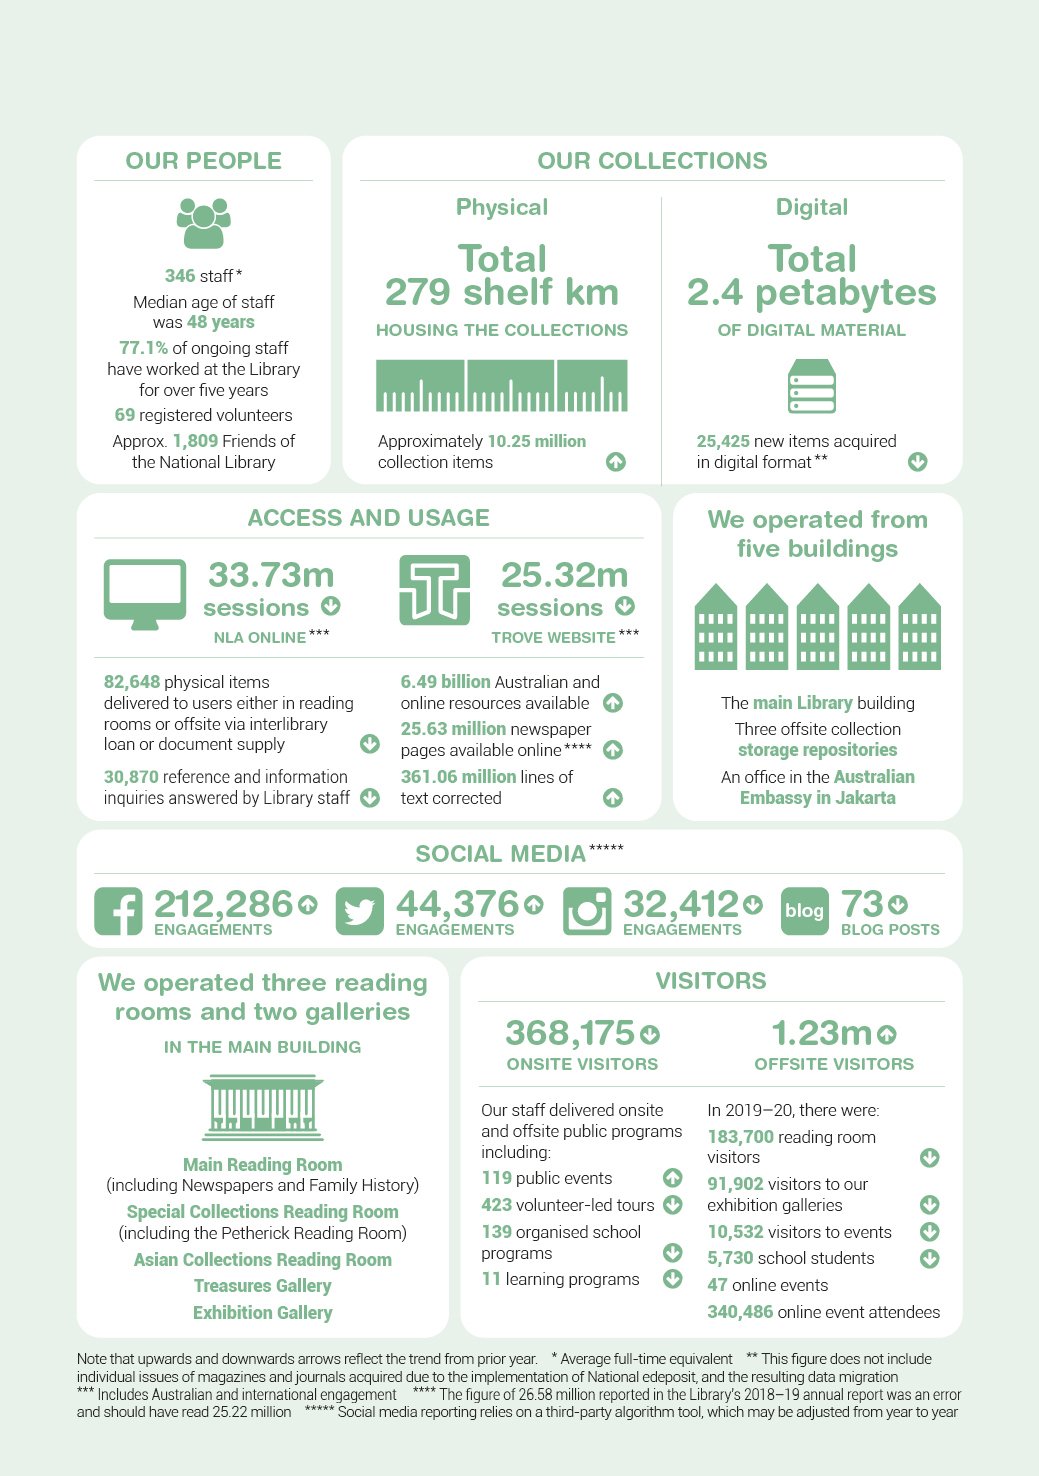 Various statistics about the Library, its staff, collections, visitors and buildings. Statistics are listed in text below.